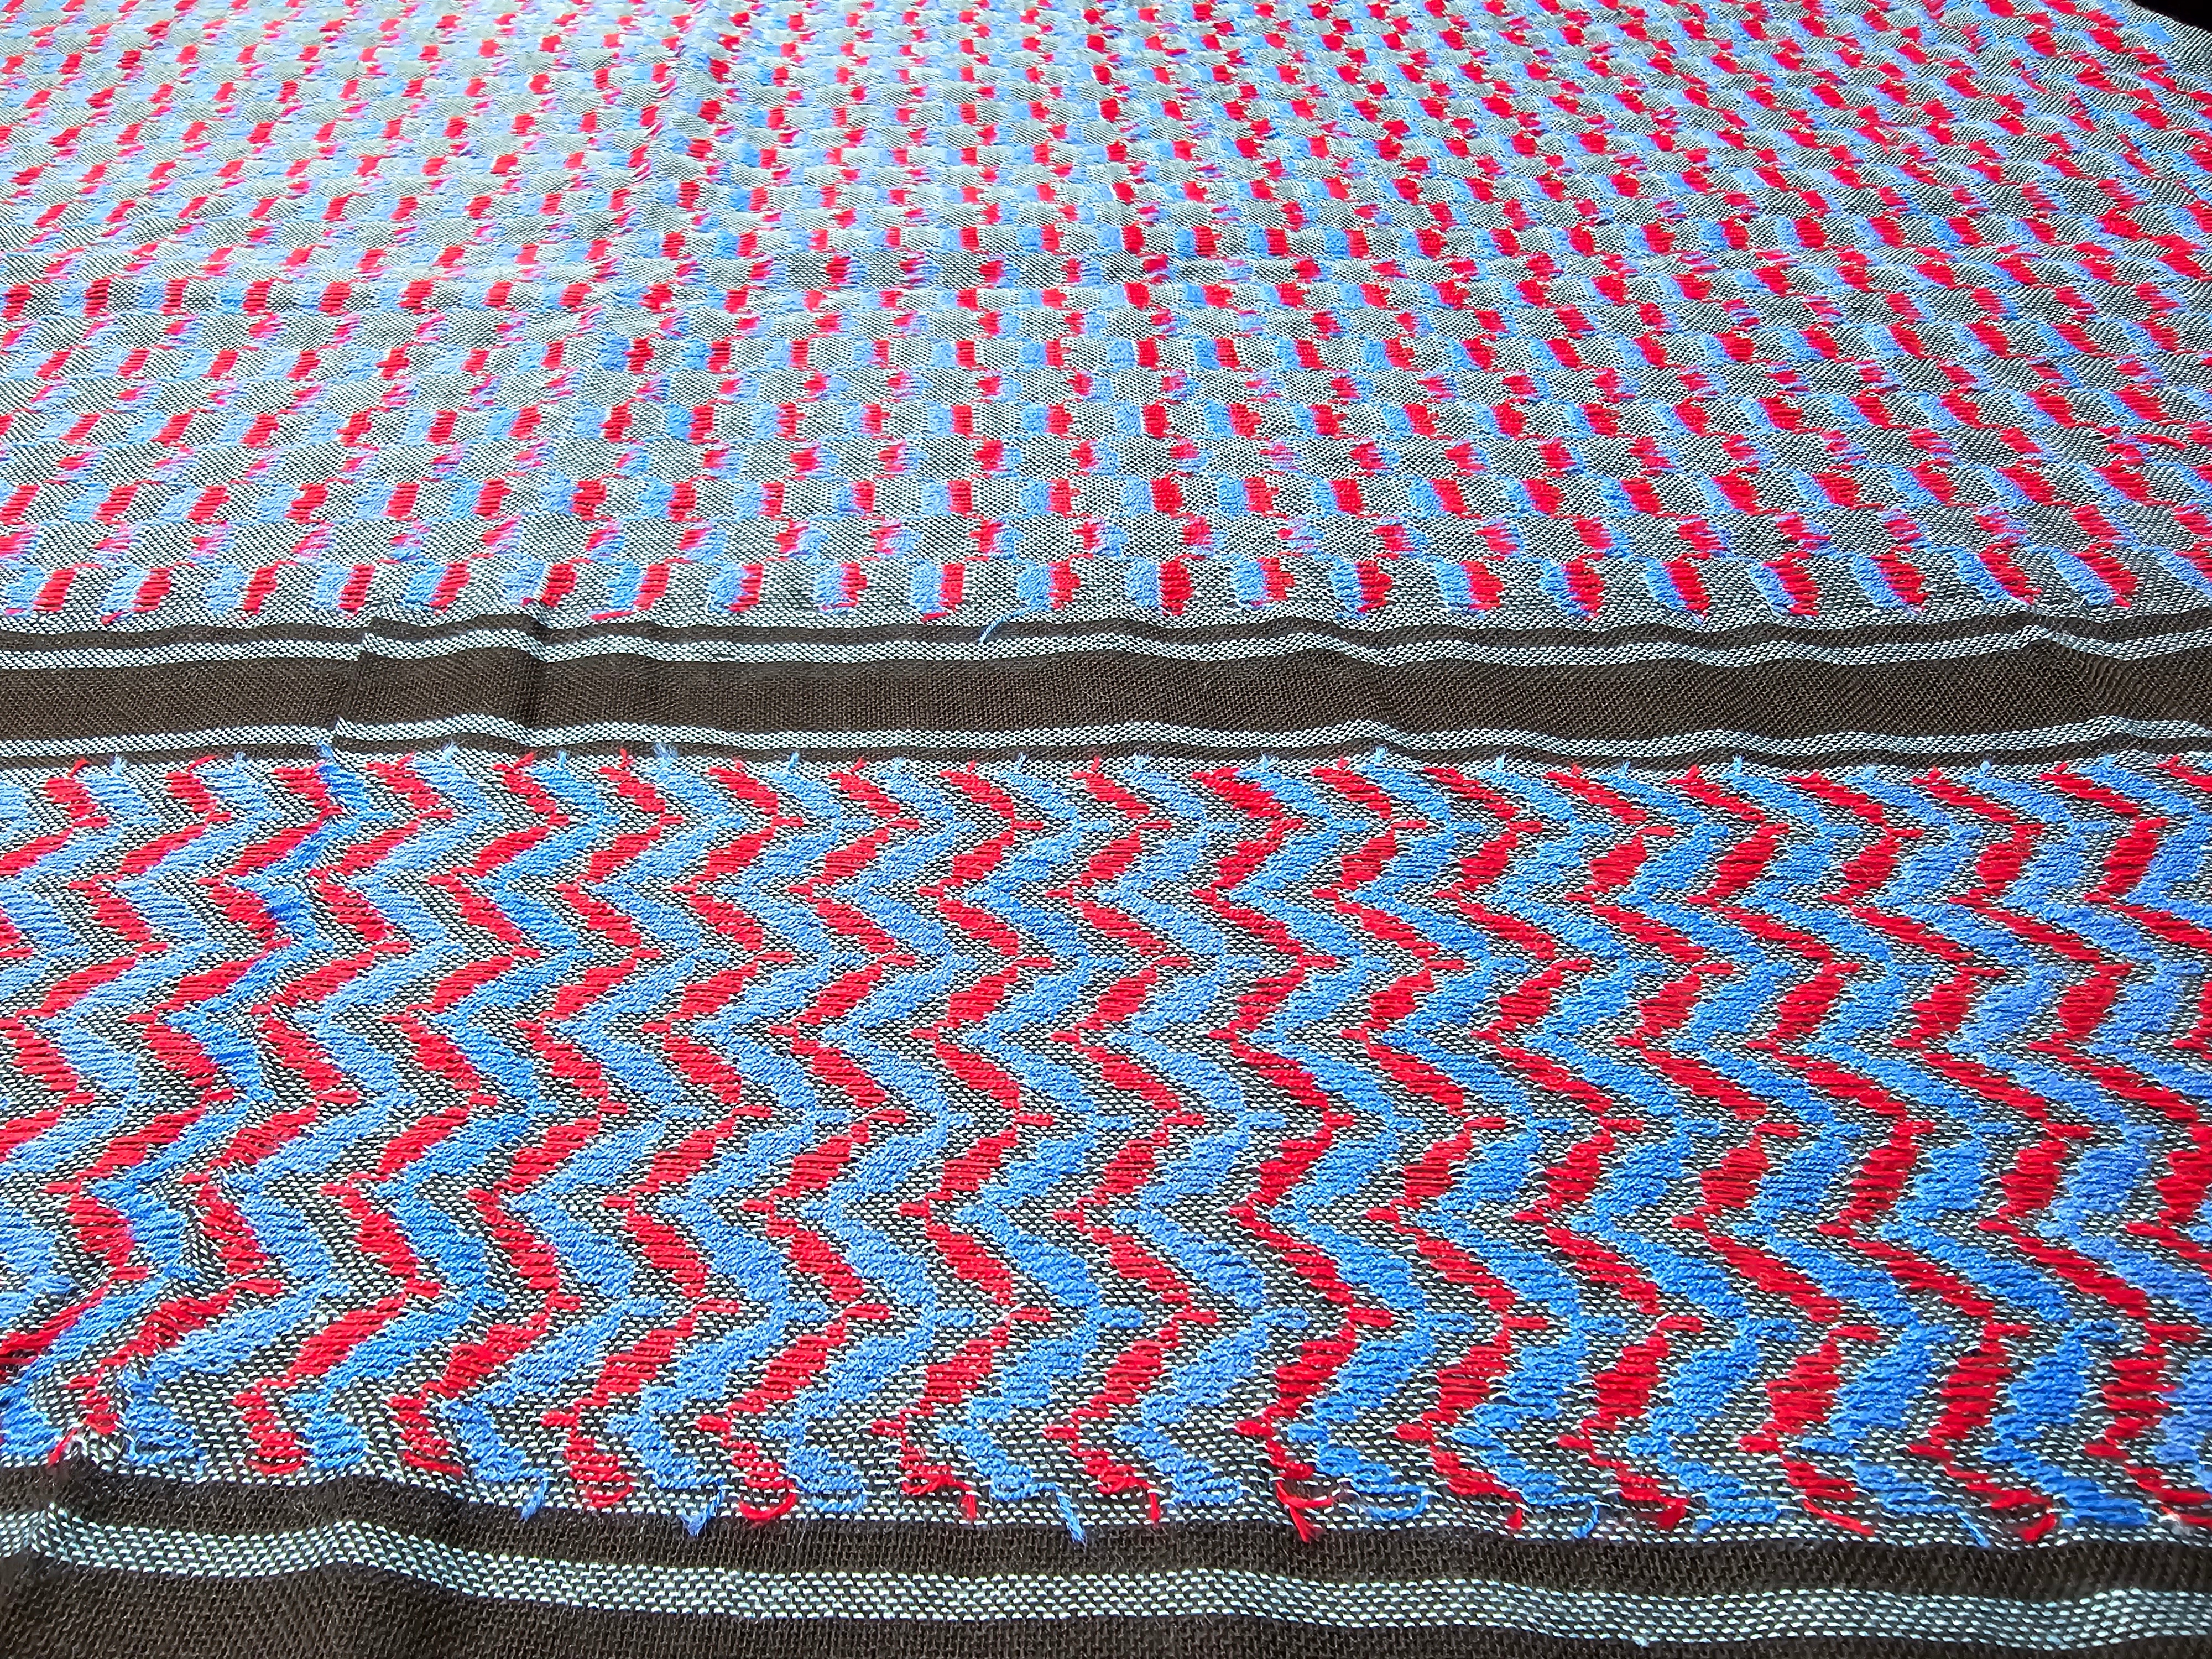 Palestinian shemagh scarf gray blue and red rajaeen